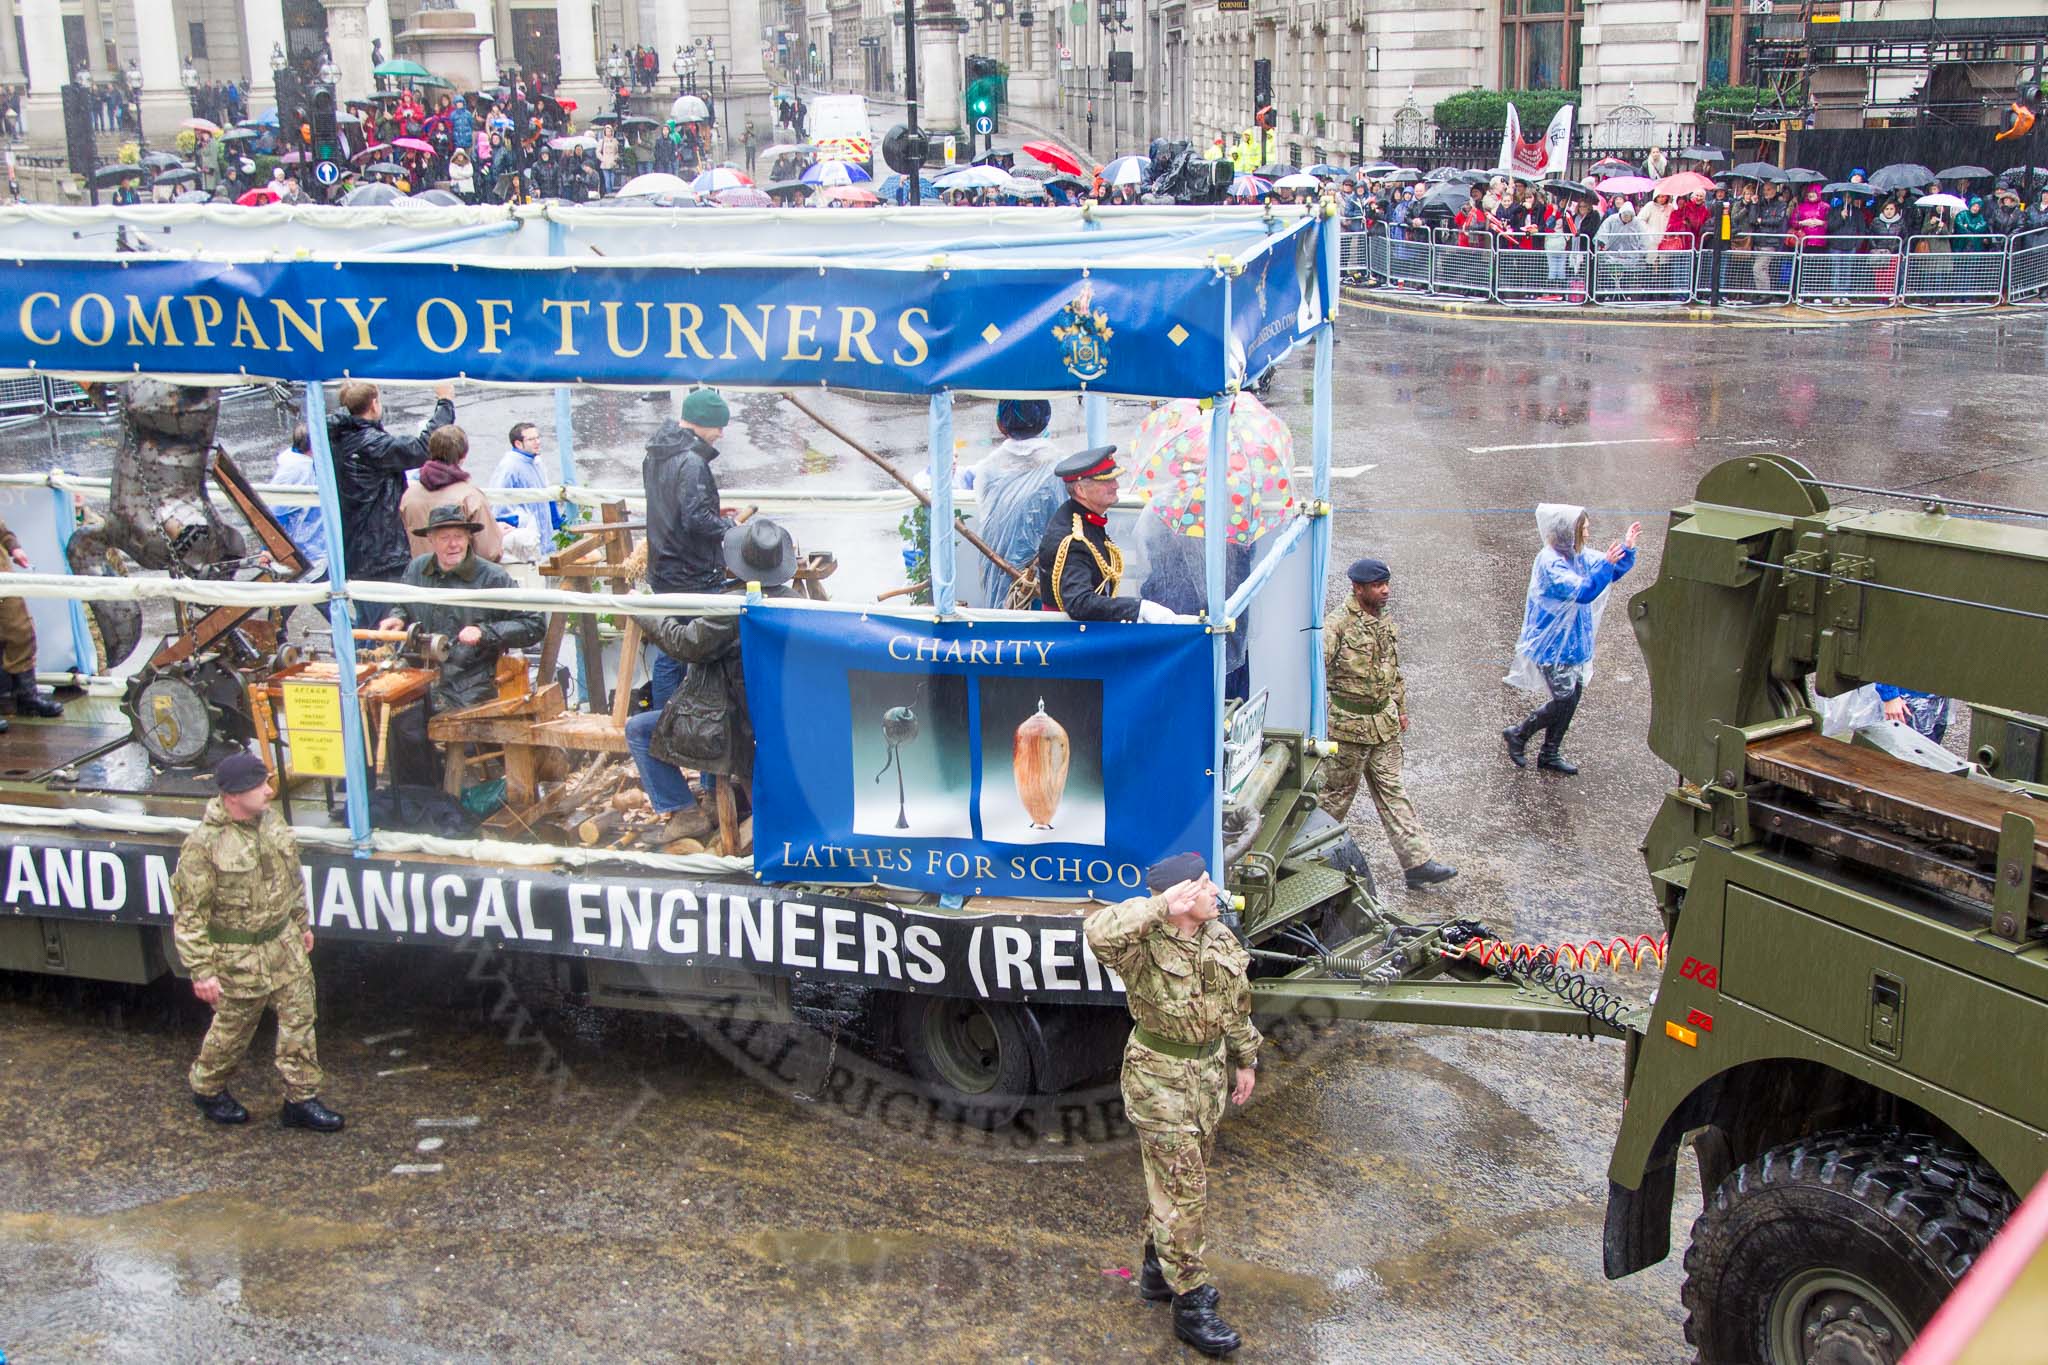 Lord Mayor's Show 2013: 51-Workshipful Company of Turners- recived Royal Charter in 1604. Its prime objective is to promote the craft of turning..
Press stand opposite Mansion House, City of London,
London,
Greater London,
United Kingdom,
on 09 November 2013 at 11:29, image #673